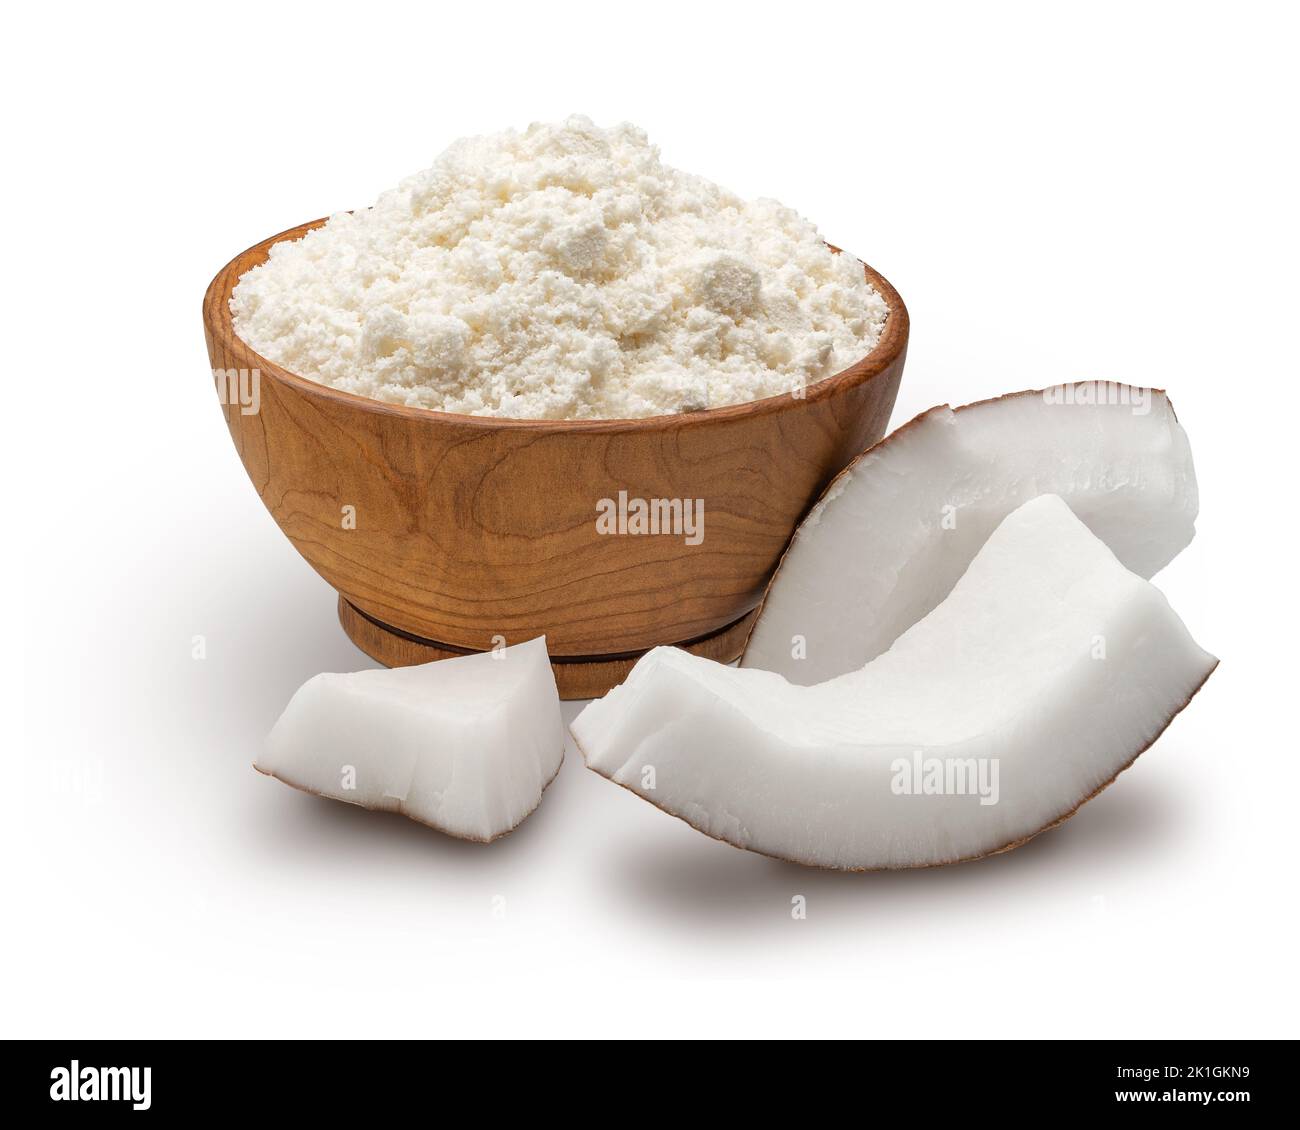 Wooden bowl full of coconut flour isolated on white Stock Photo